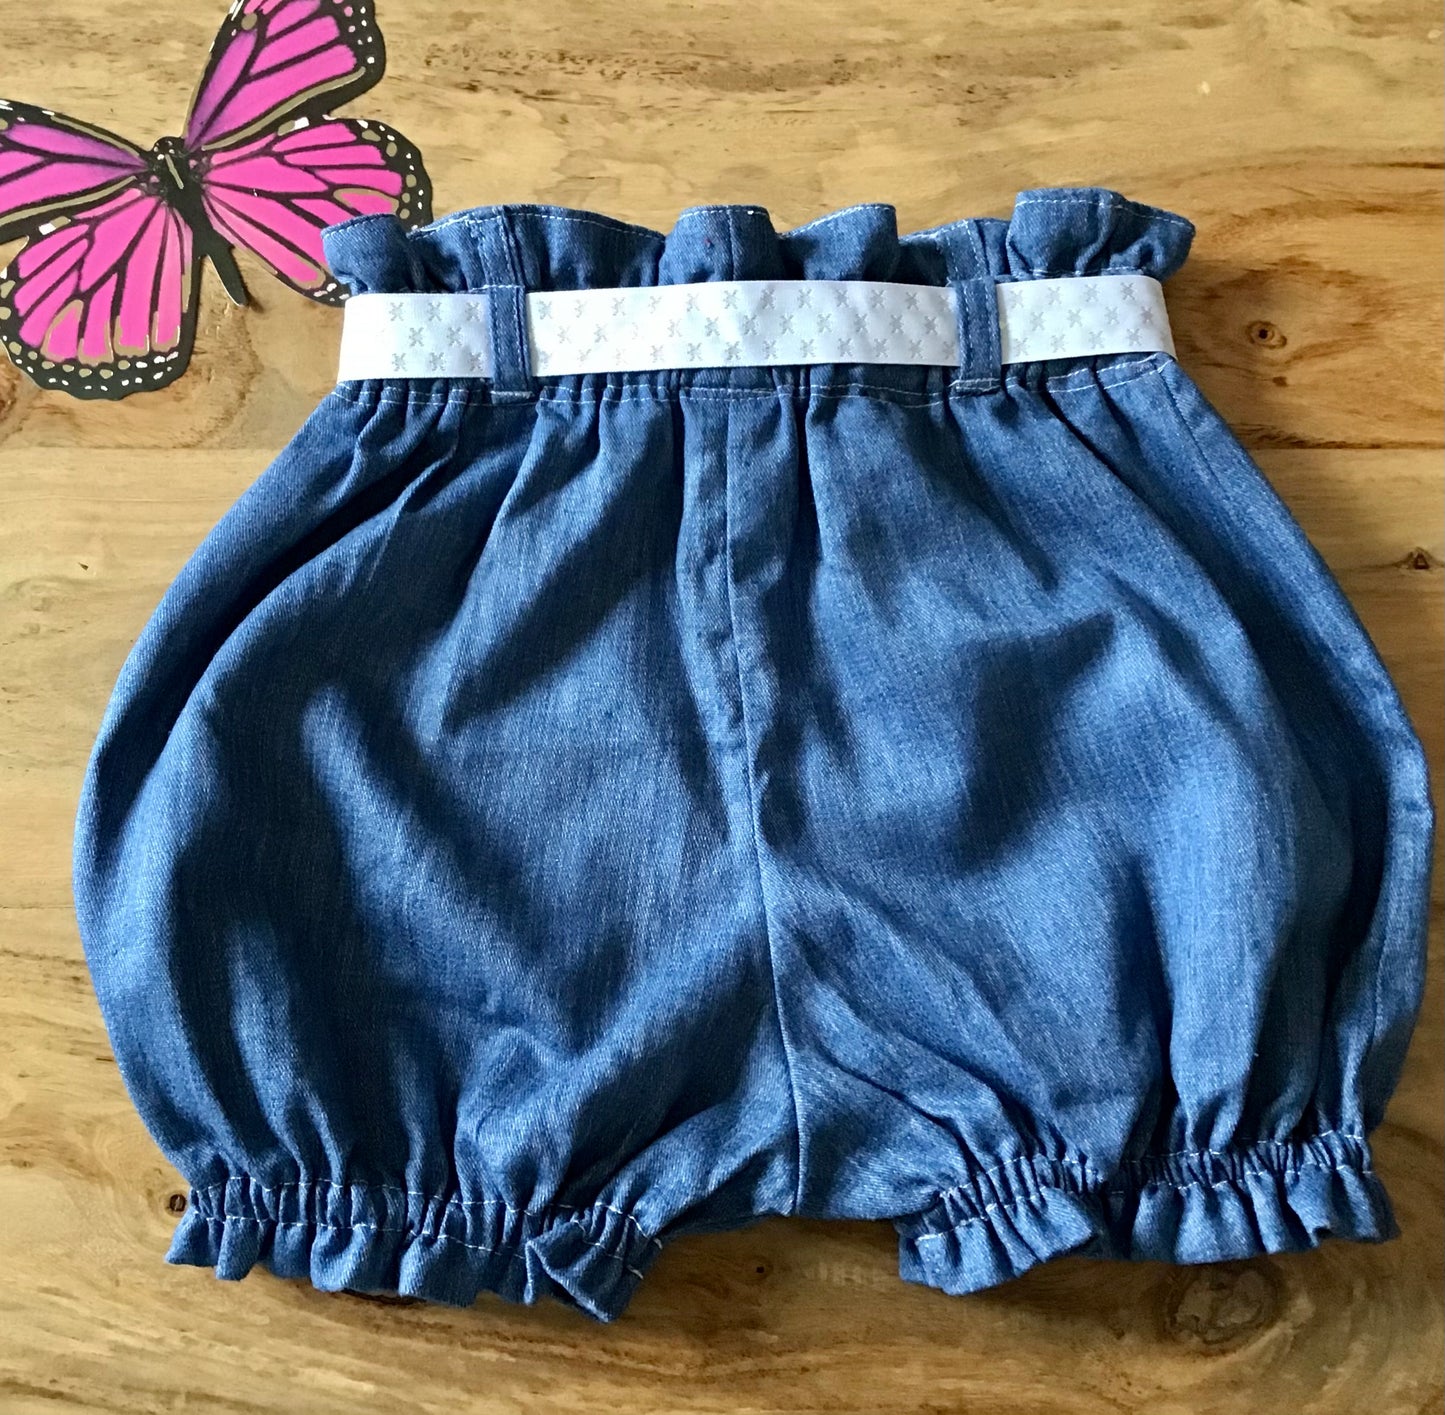 Bloomer vintage model ready to goGr: 3 years to 5 years